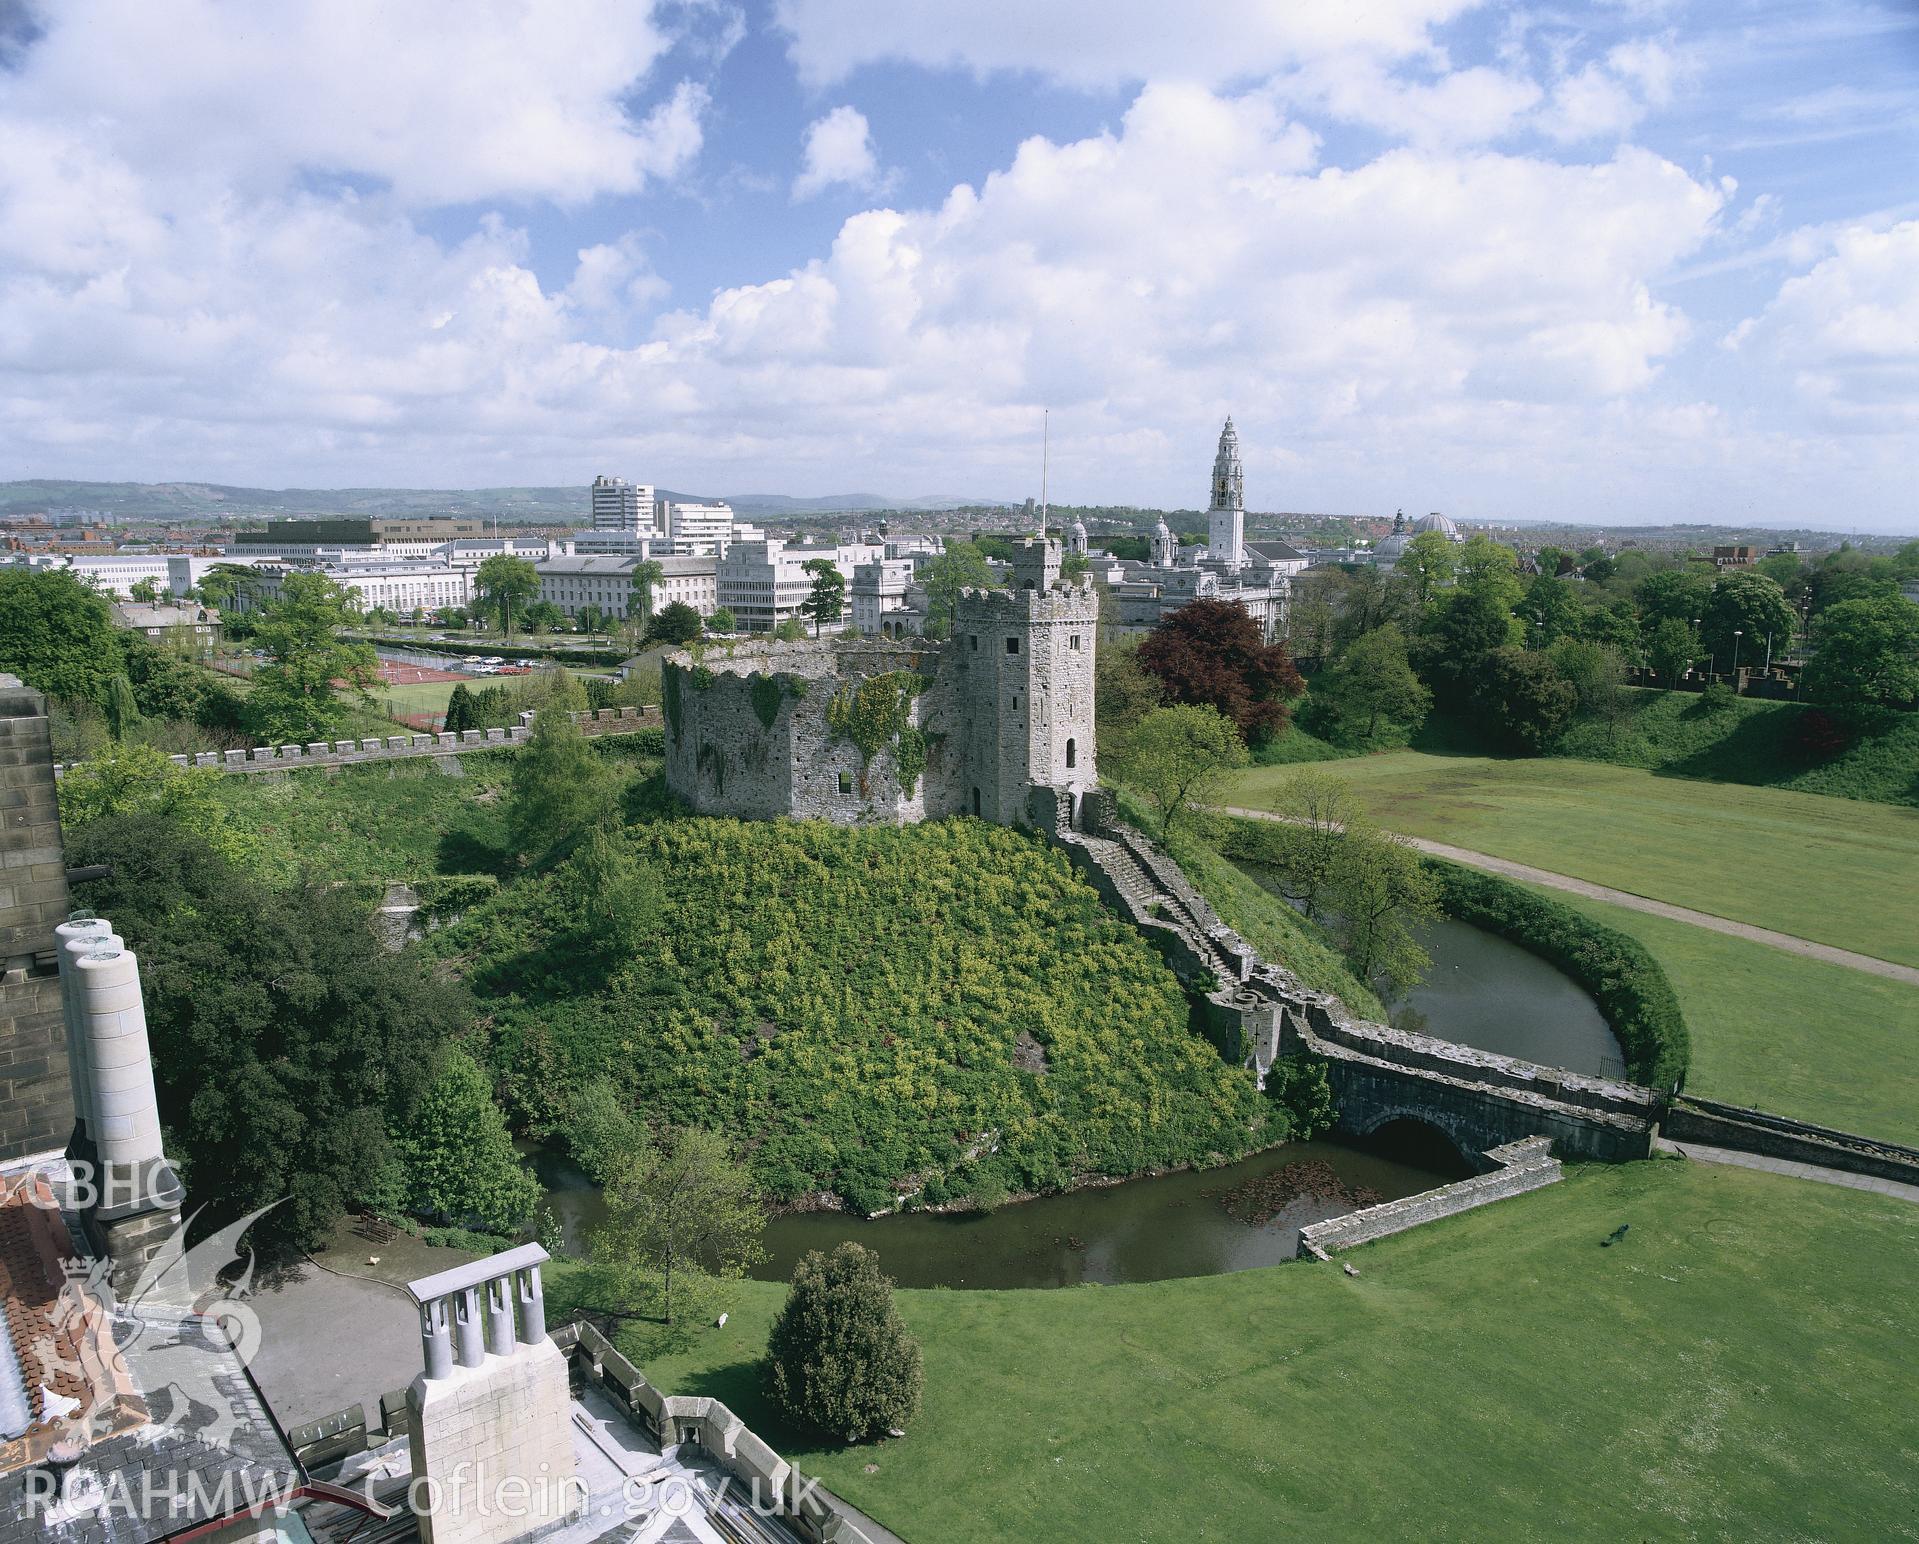 RCAHMW colour transparency of a general exterior view of Cardiff Castle, set in the Cardiff City landscape.